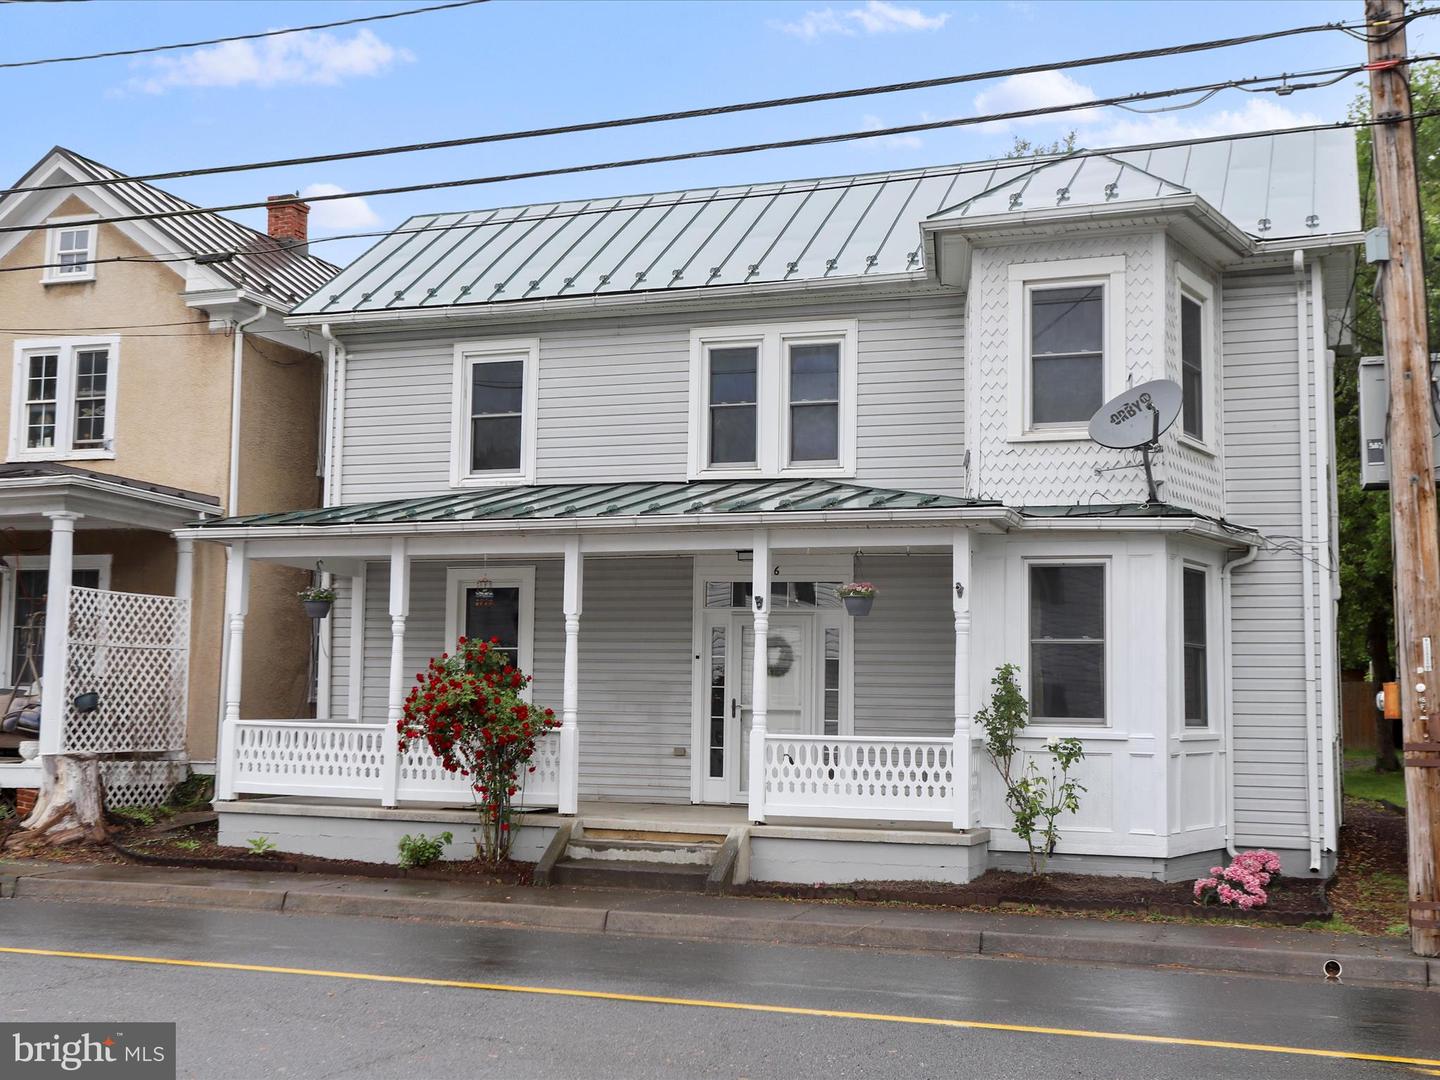 126 W MAIN ST, BERRYVILLE, Virginia 22611, 2 Bedrooms Bedrooms, ,1 BathroomBathrooms,Residential,For sale,126 W MAIN ST,VACL2002688 MLS # VACL2002688